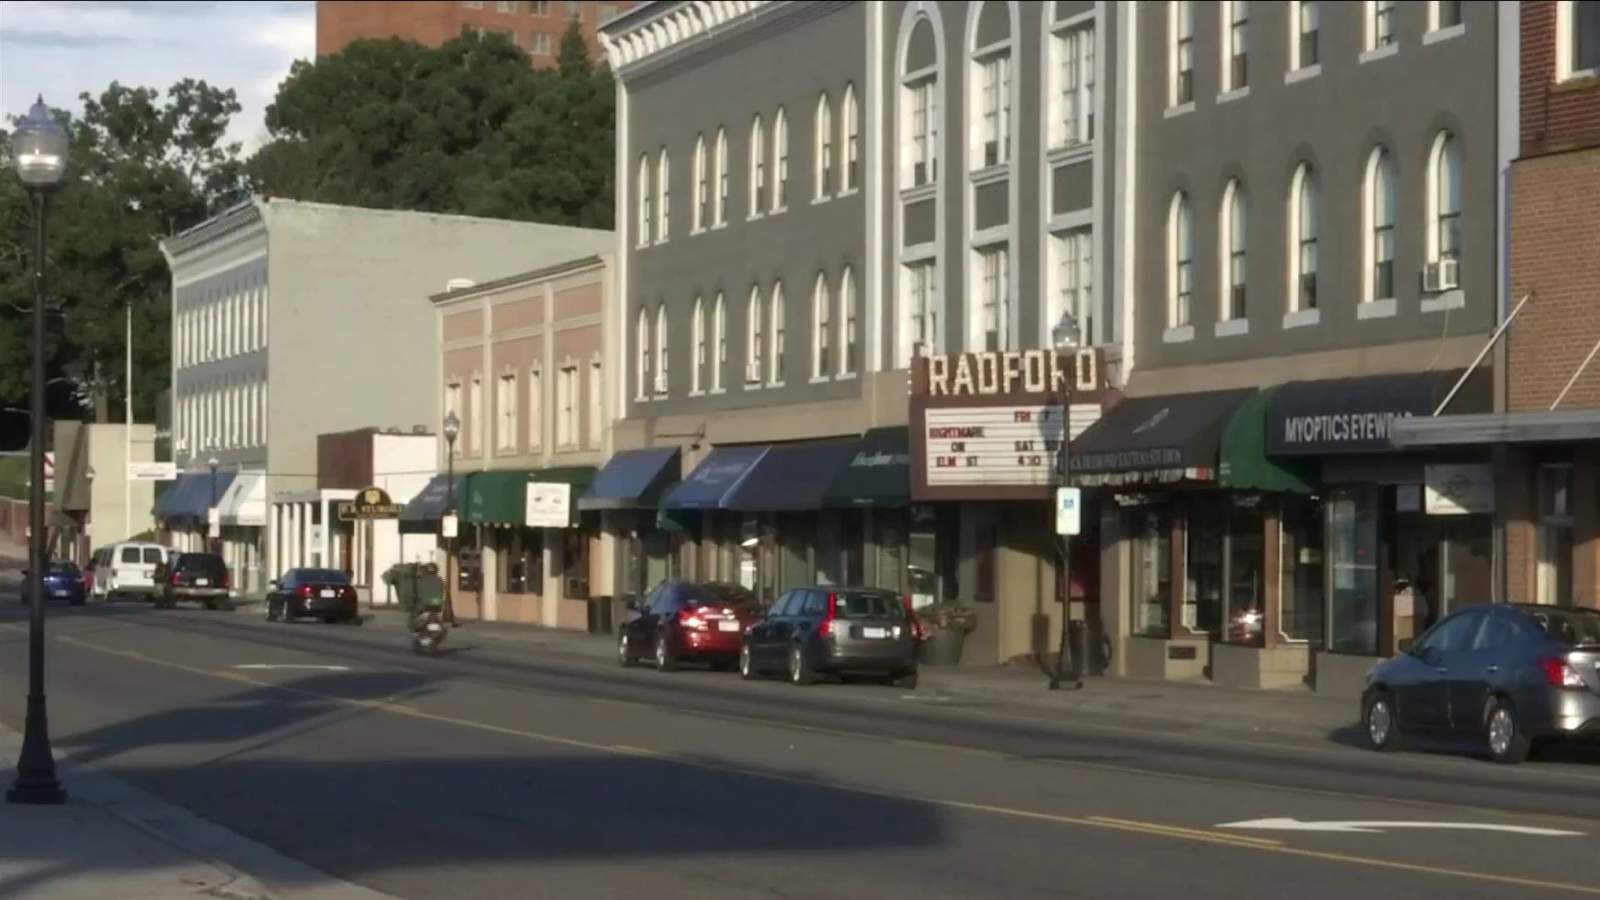 Radford city leaders consider stricter COVID-19 regulations as students return to campus